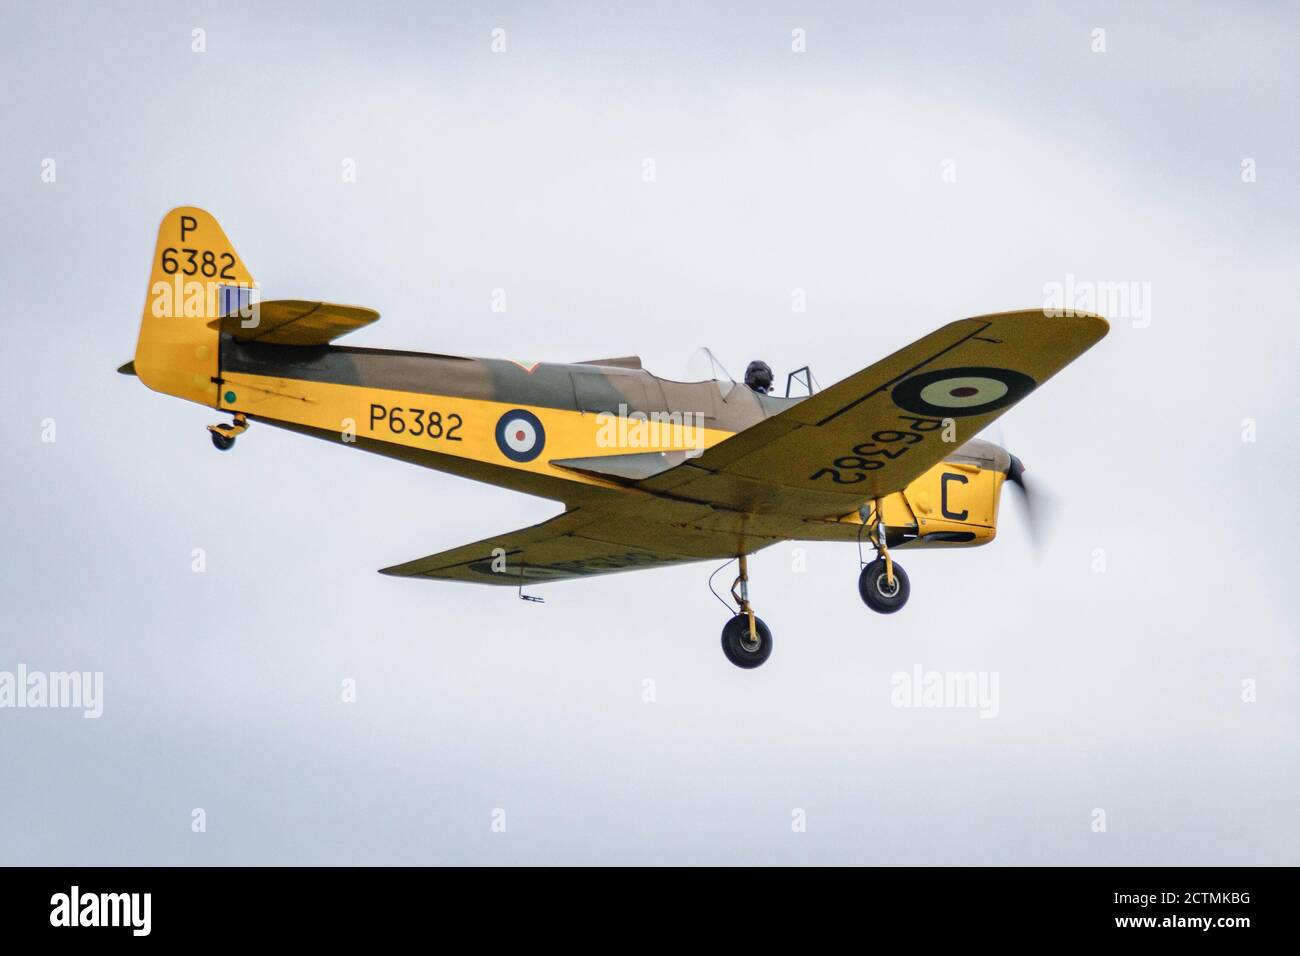 The British two-seat Miles Magister monoplane basic trainer aircraft was built in 1939 and entered service with the RAF as P6382. Stock Photo